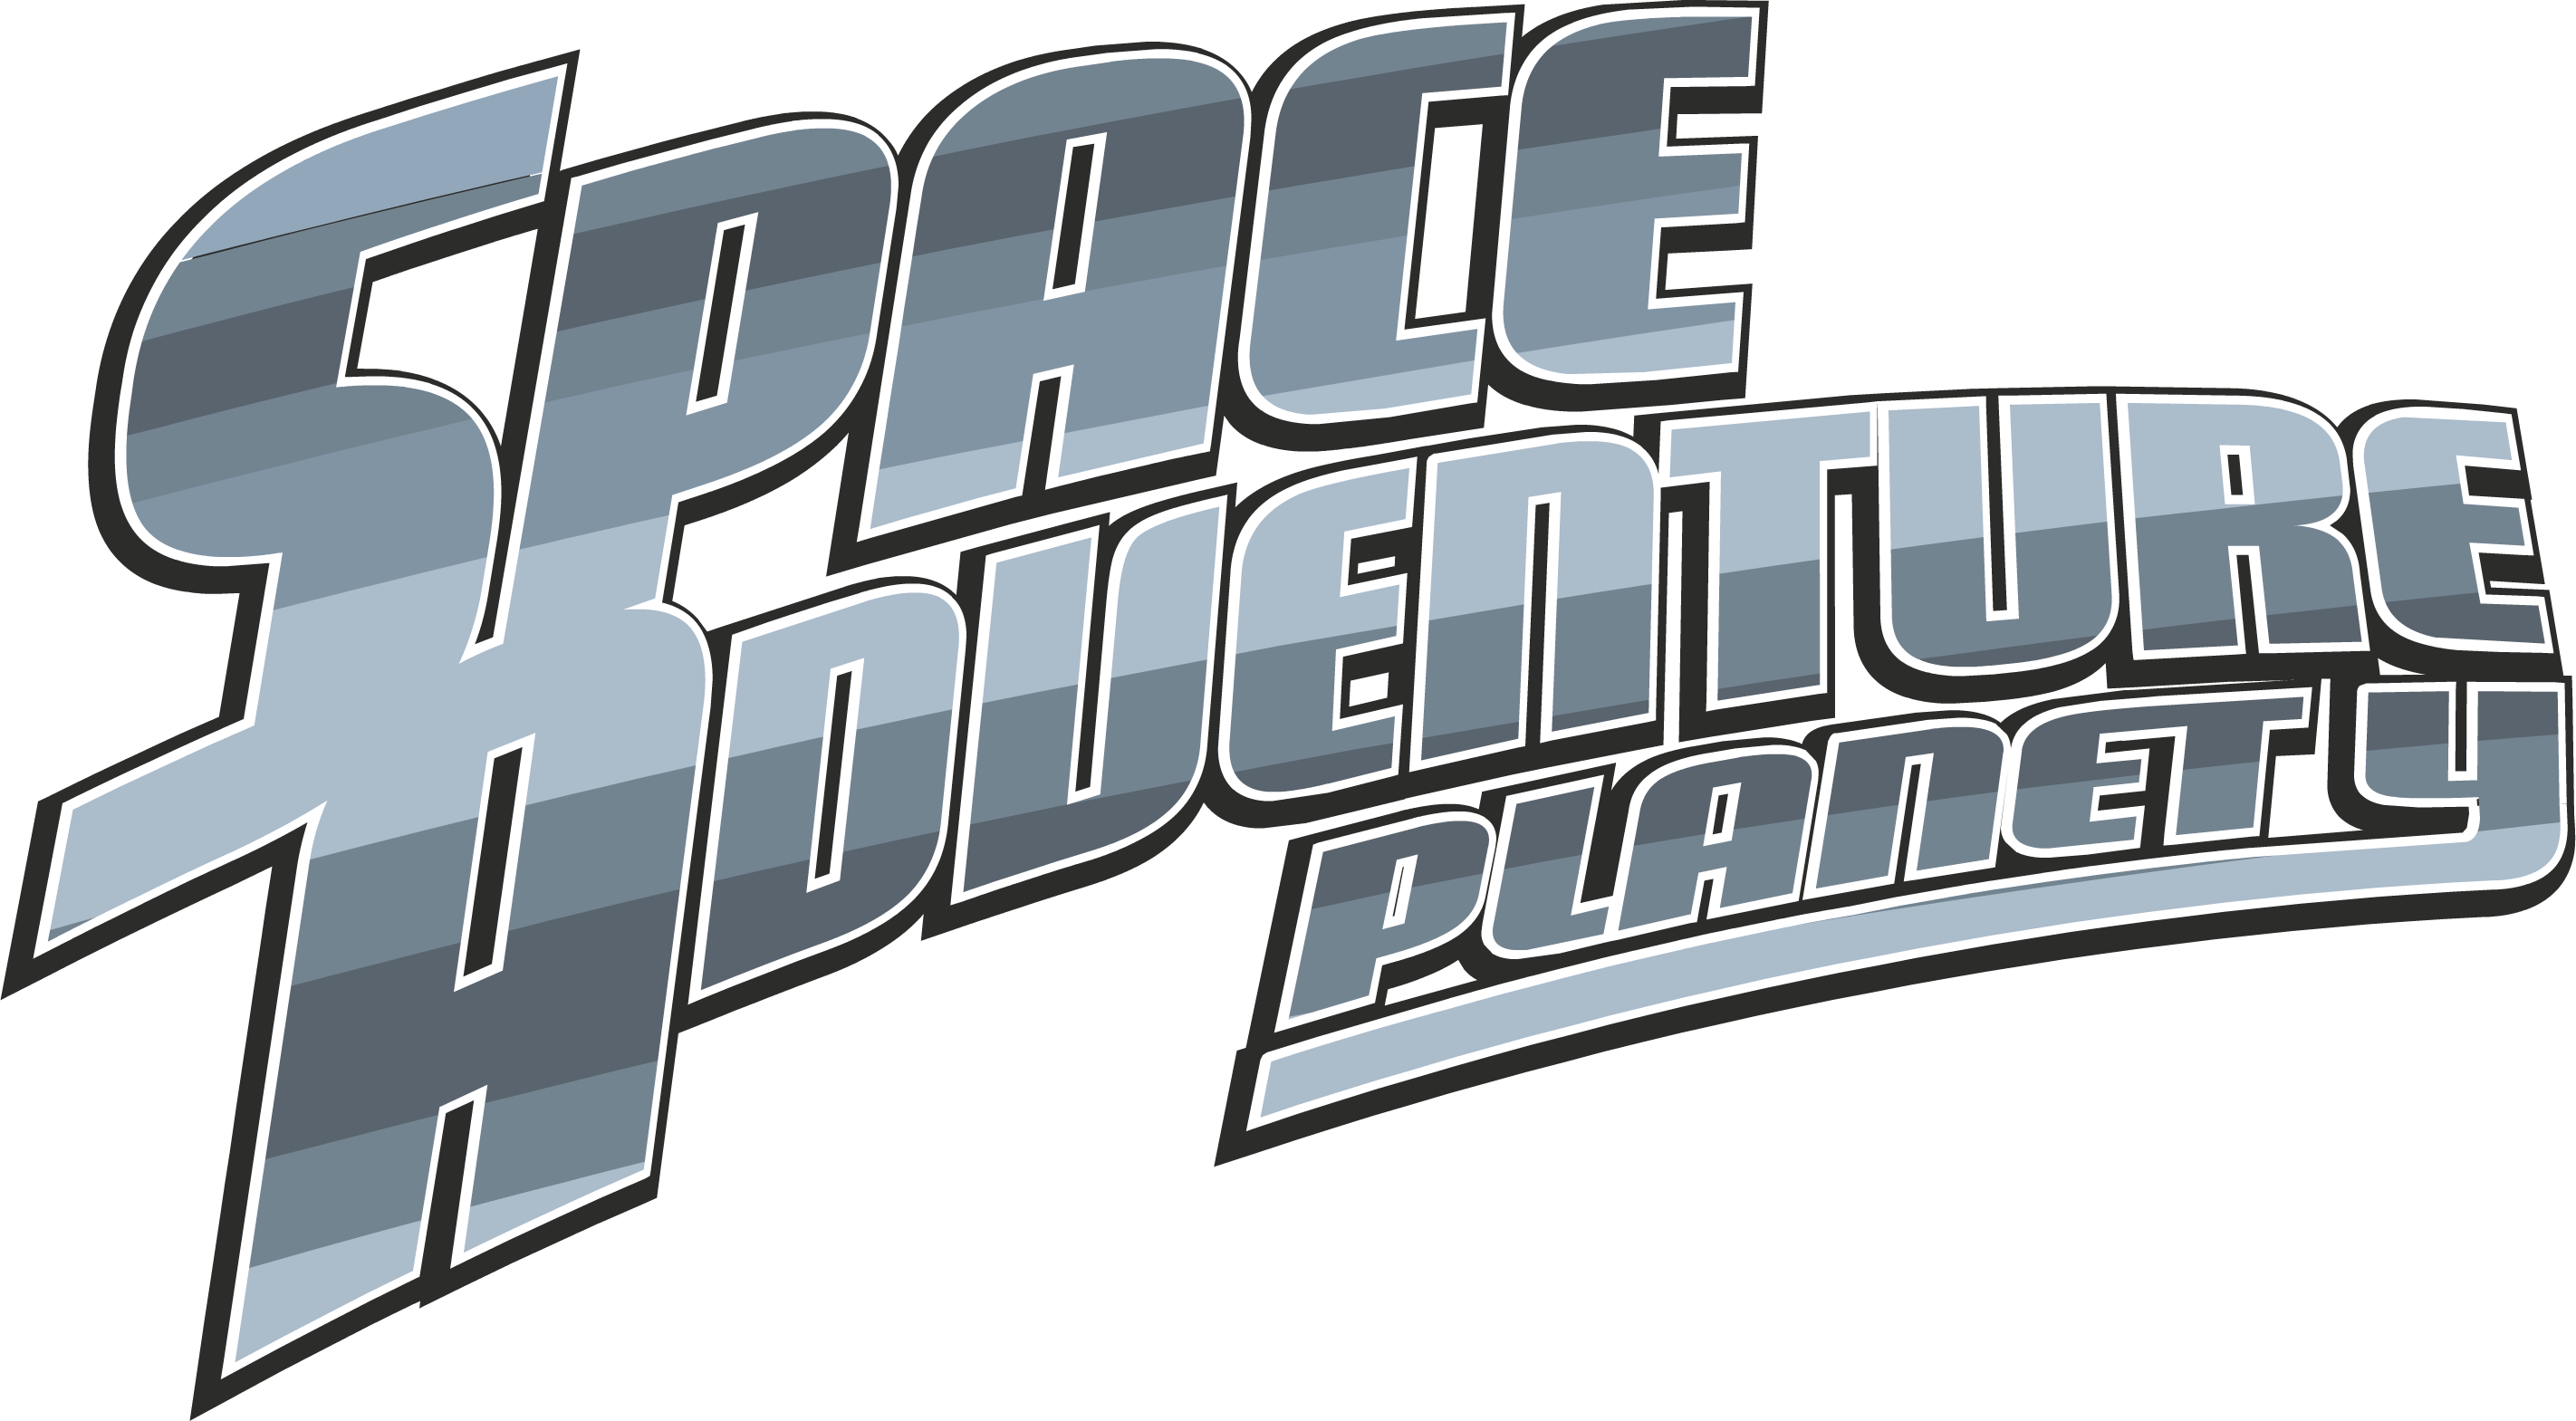 Image result for Space adventure planet y